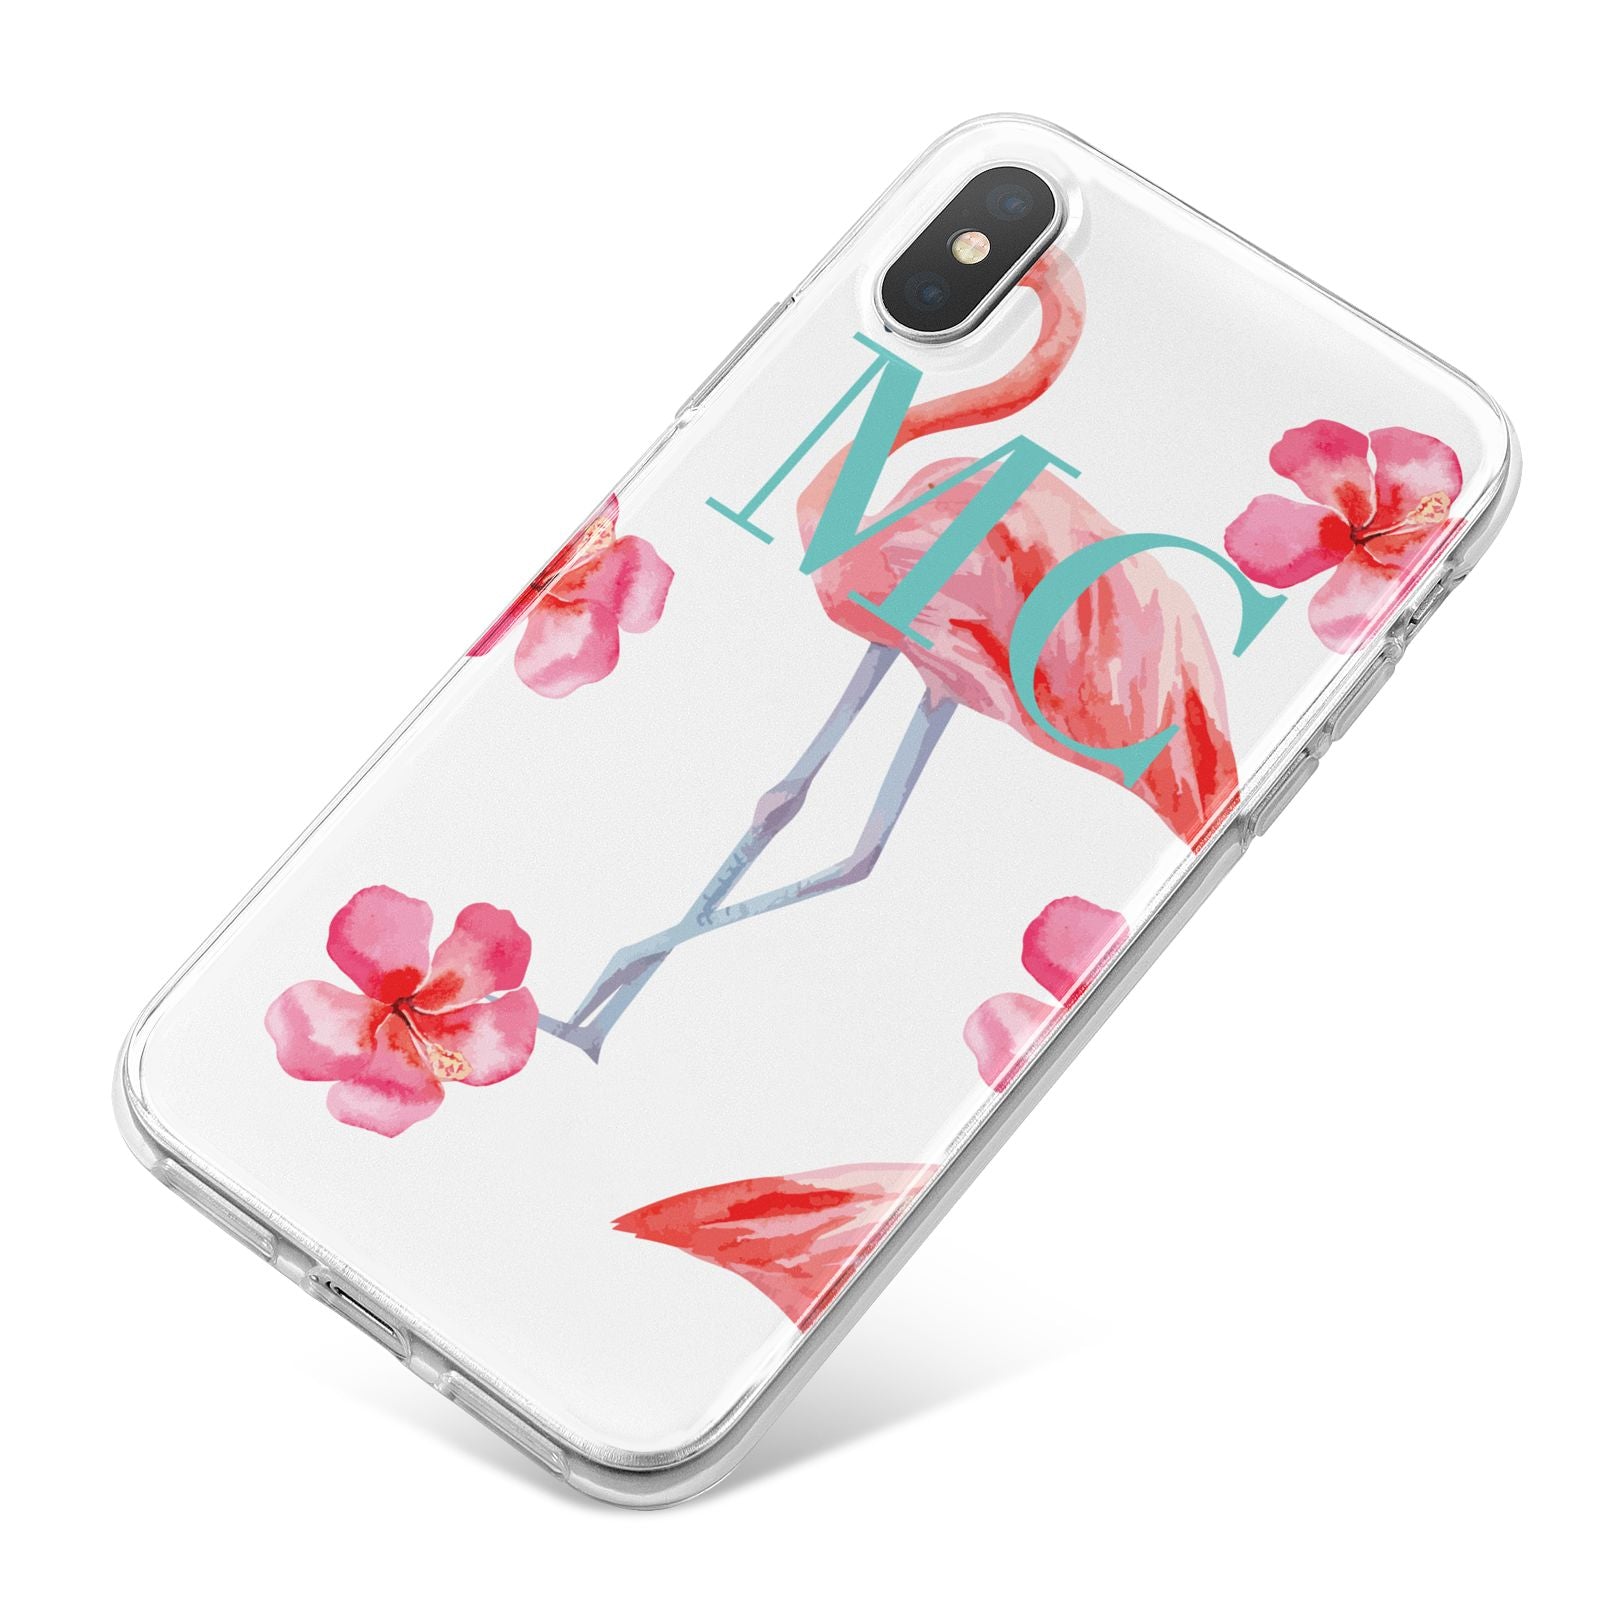 Personalised Initials Flamingo 3 iPhone X Bumper Case on Silver iPhone